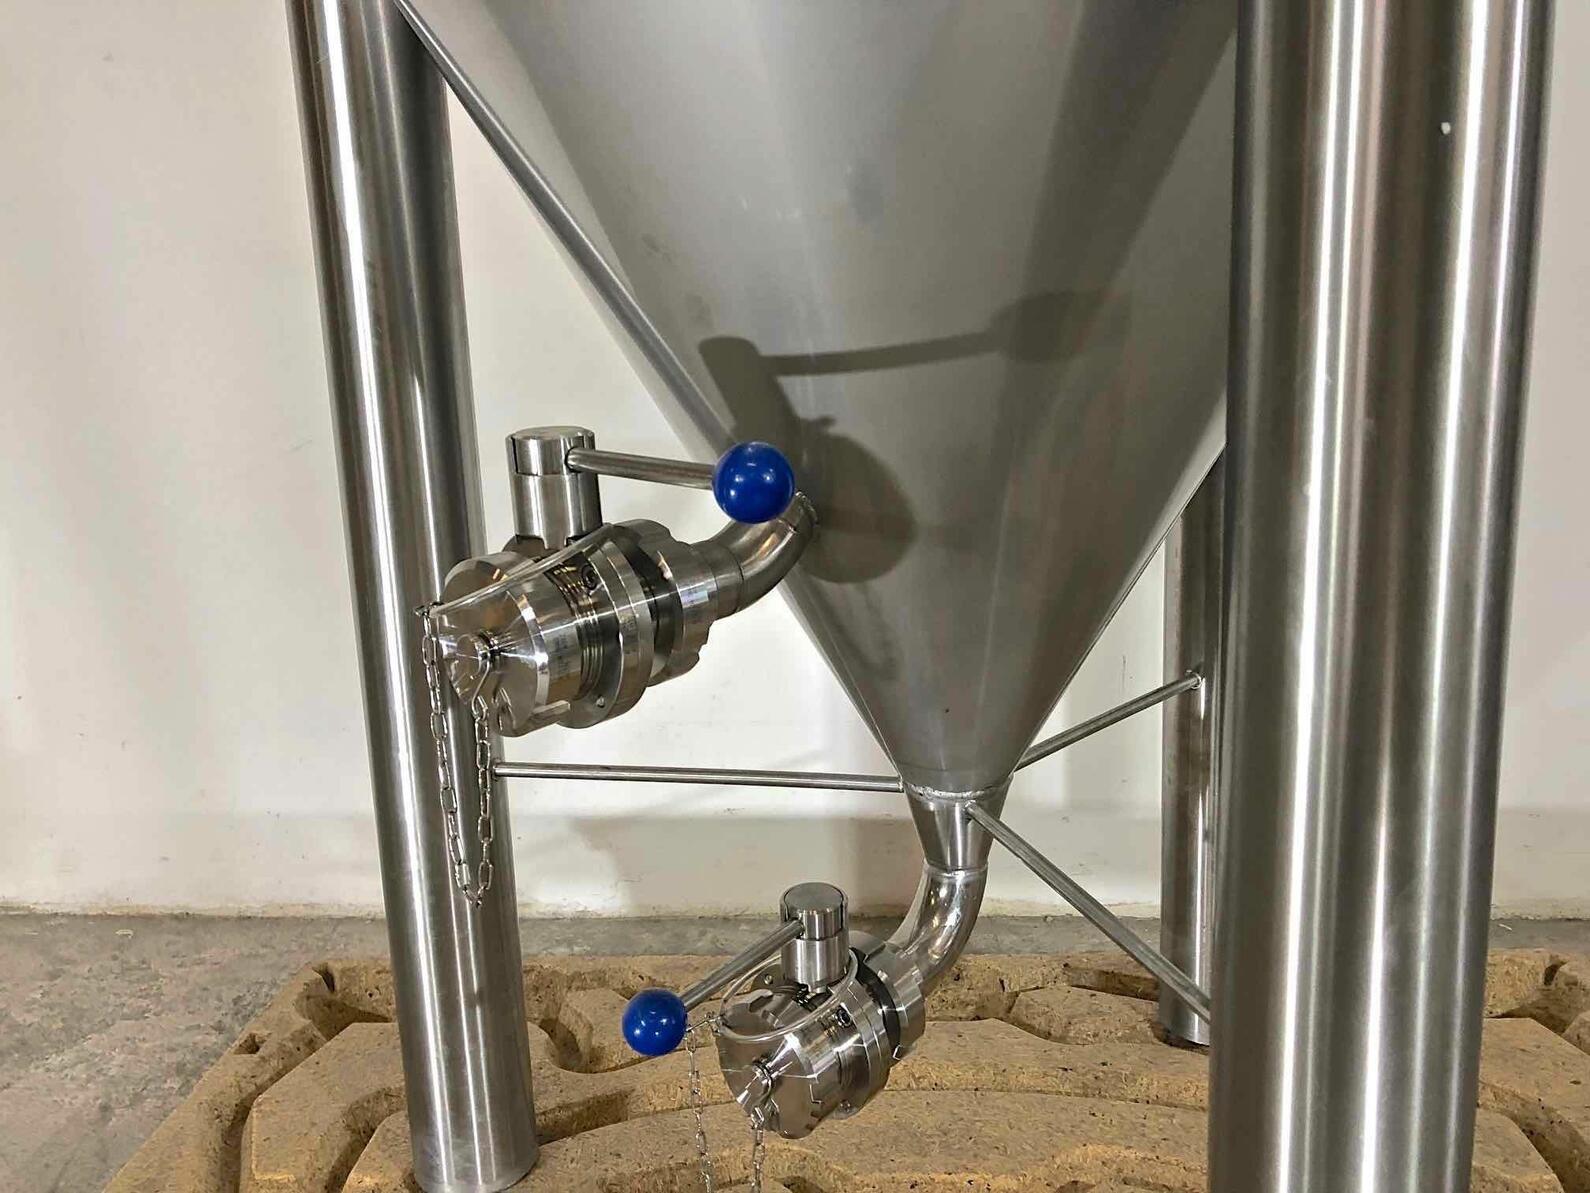 304 stainless steel vat - Closed on feet - Cylindro-conical